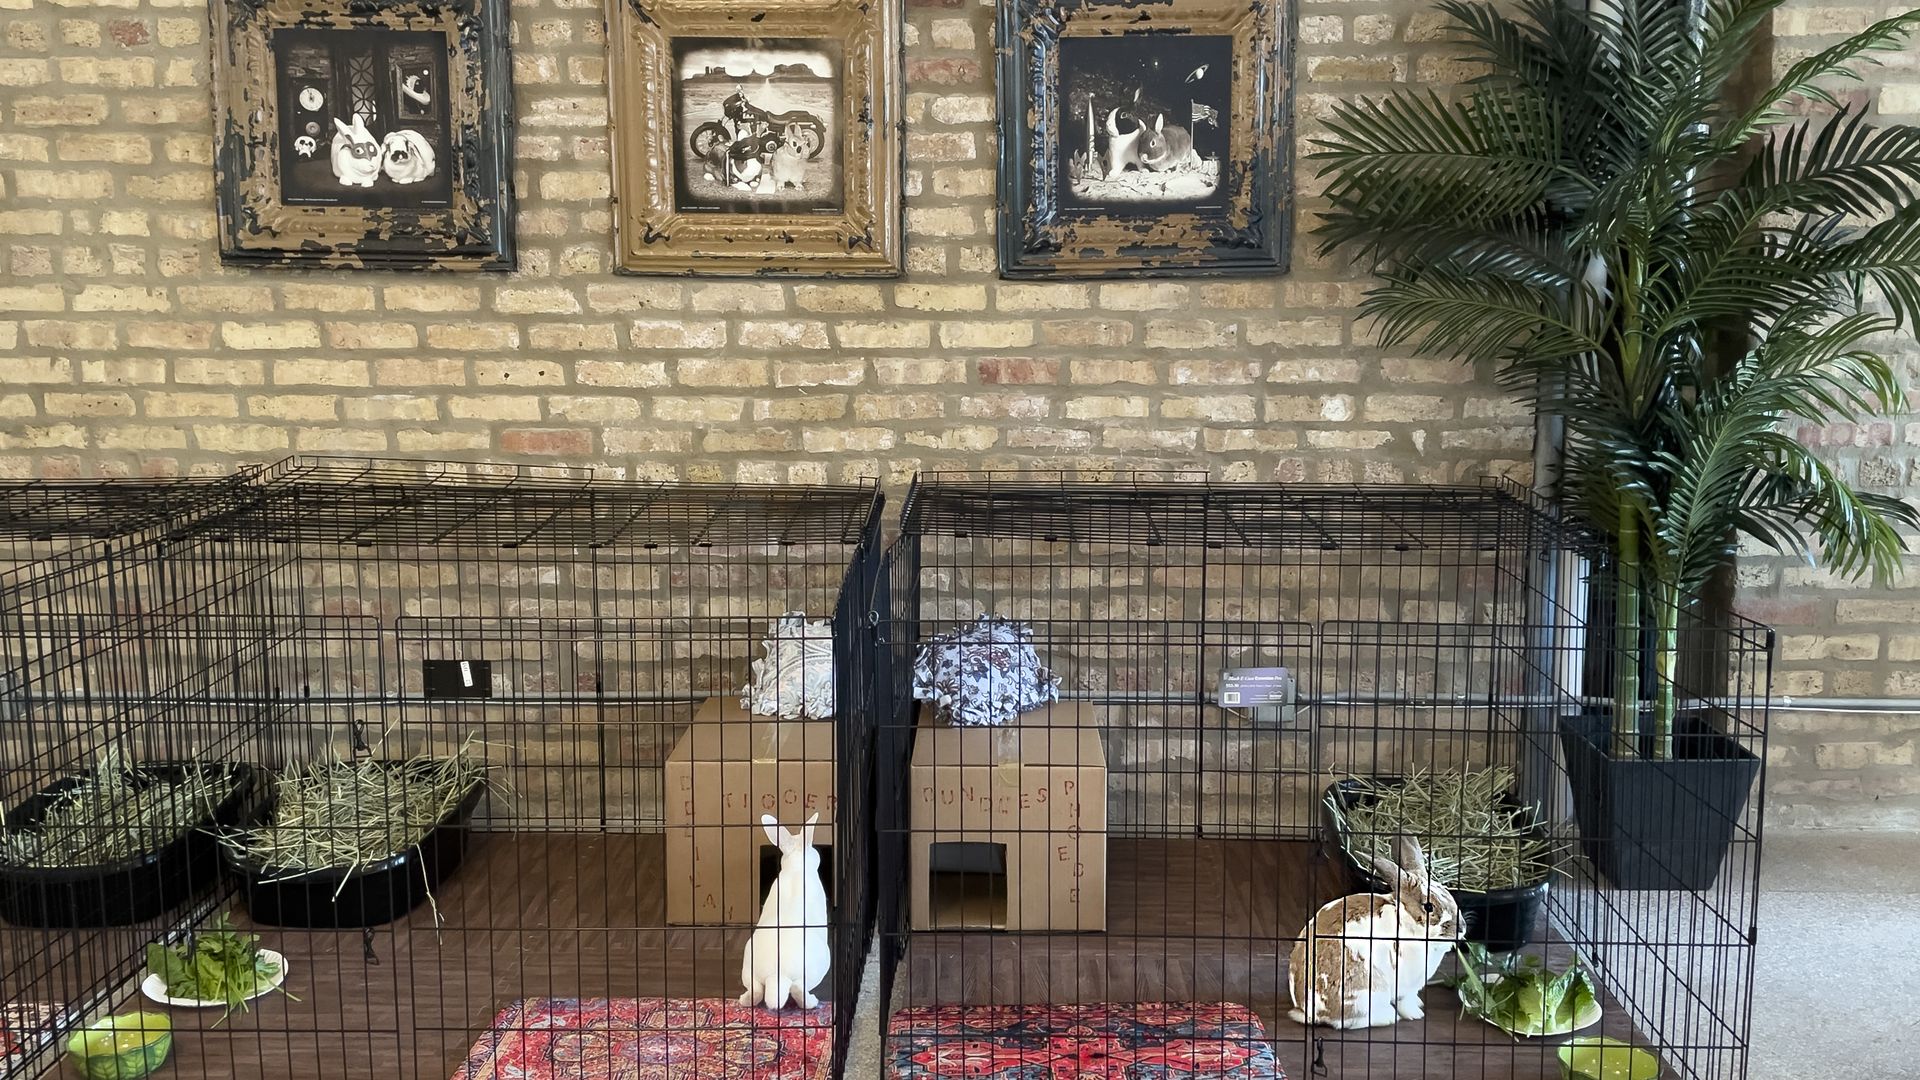 Two rabbit in furnished hutches